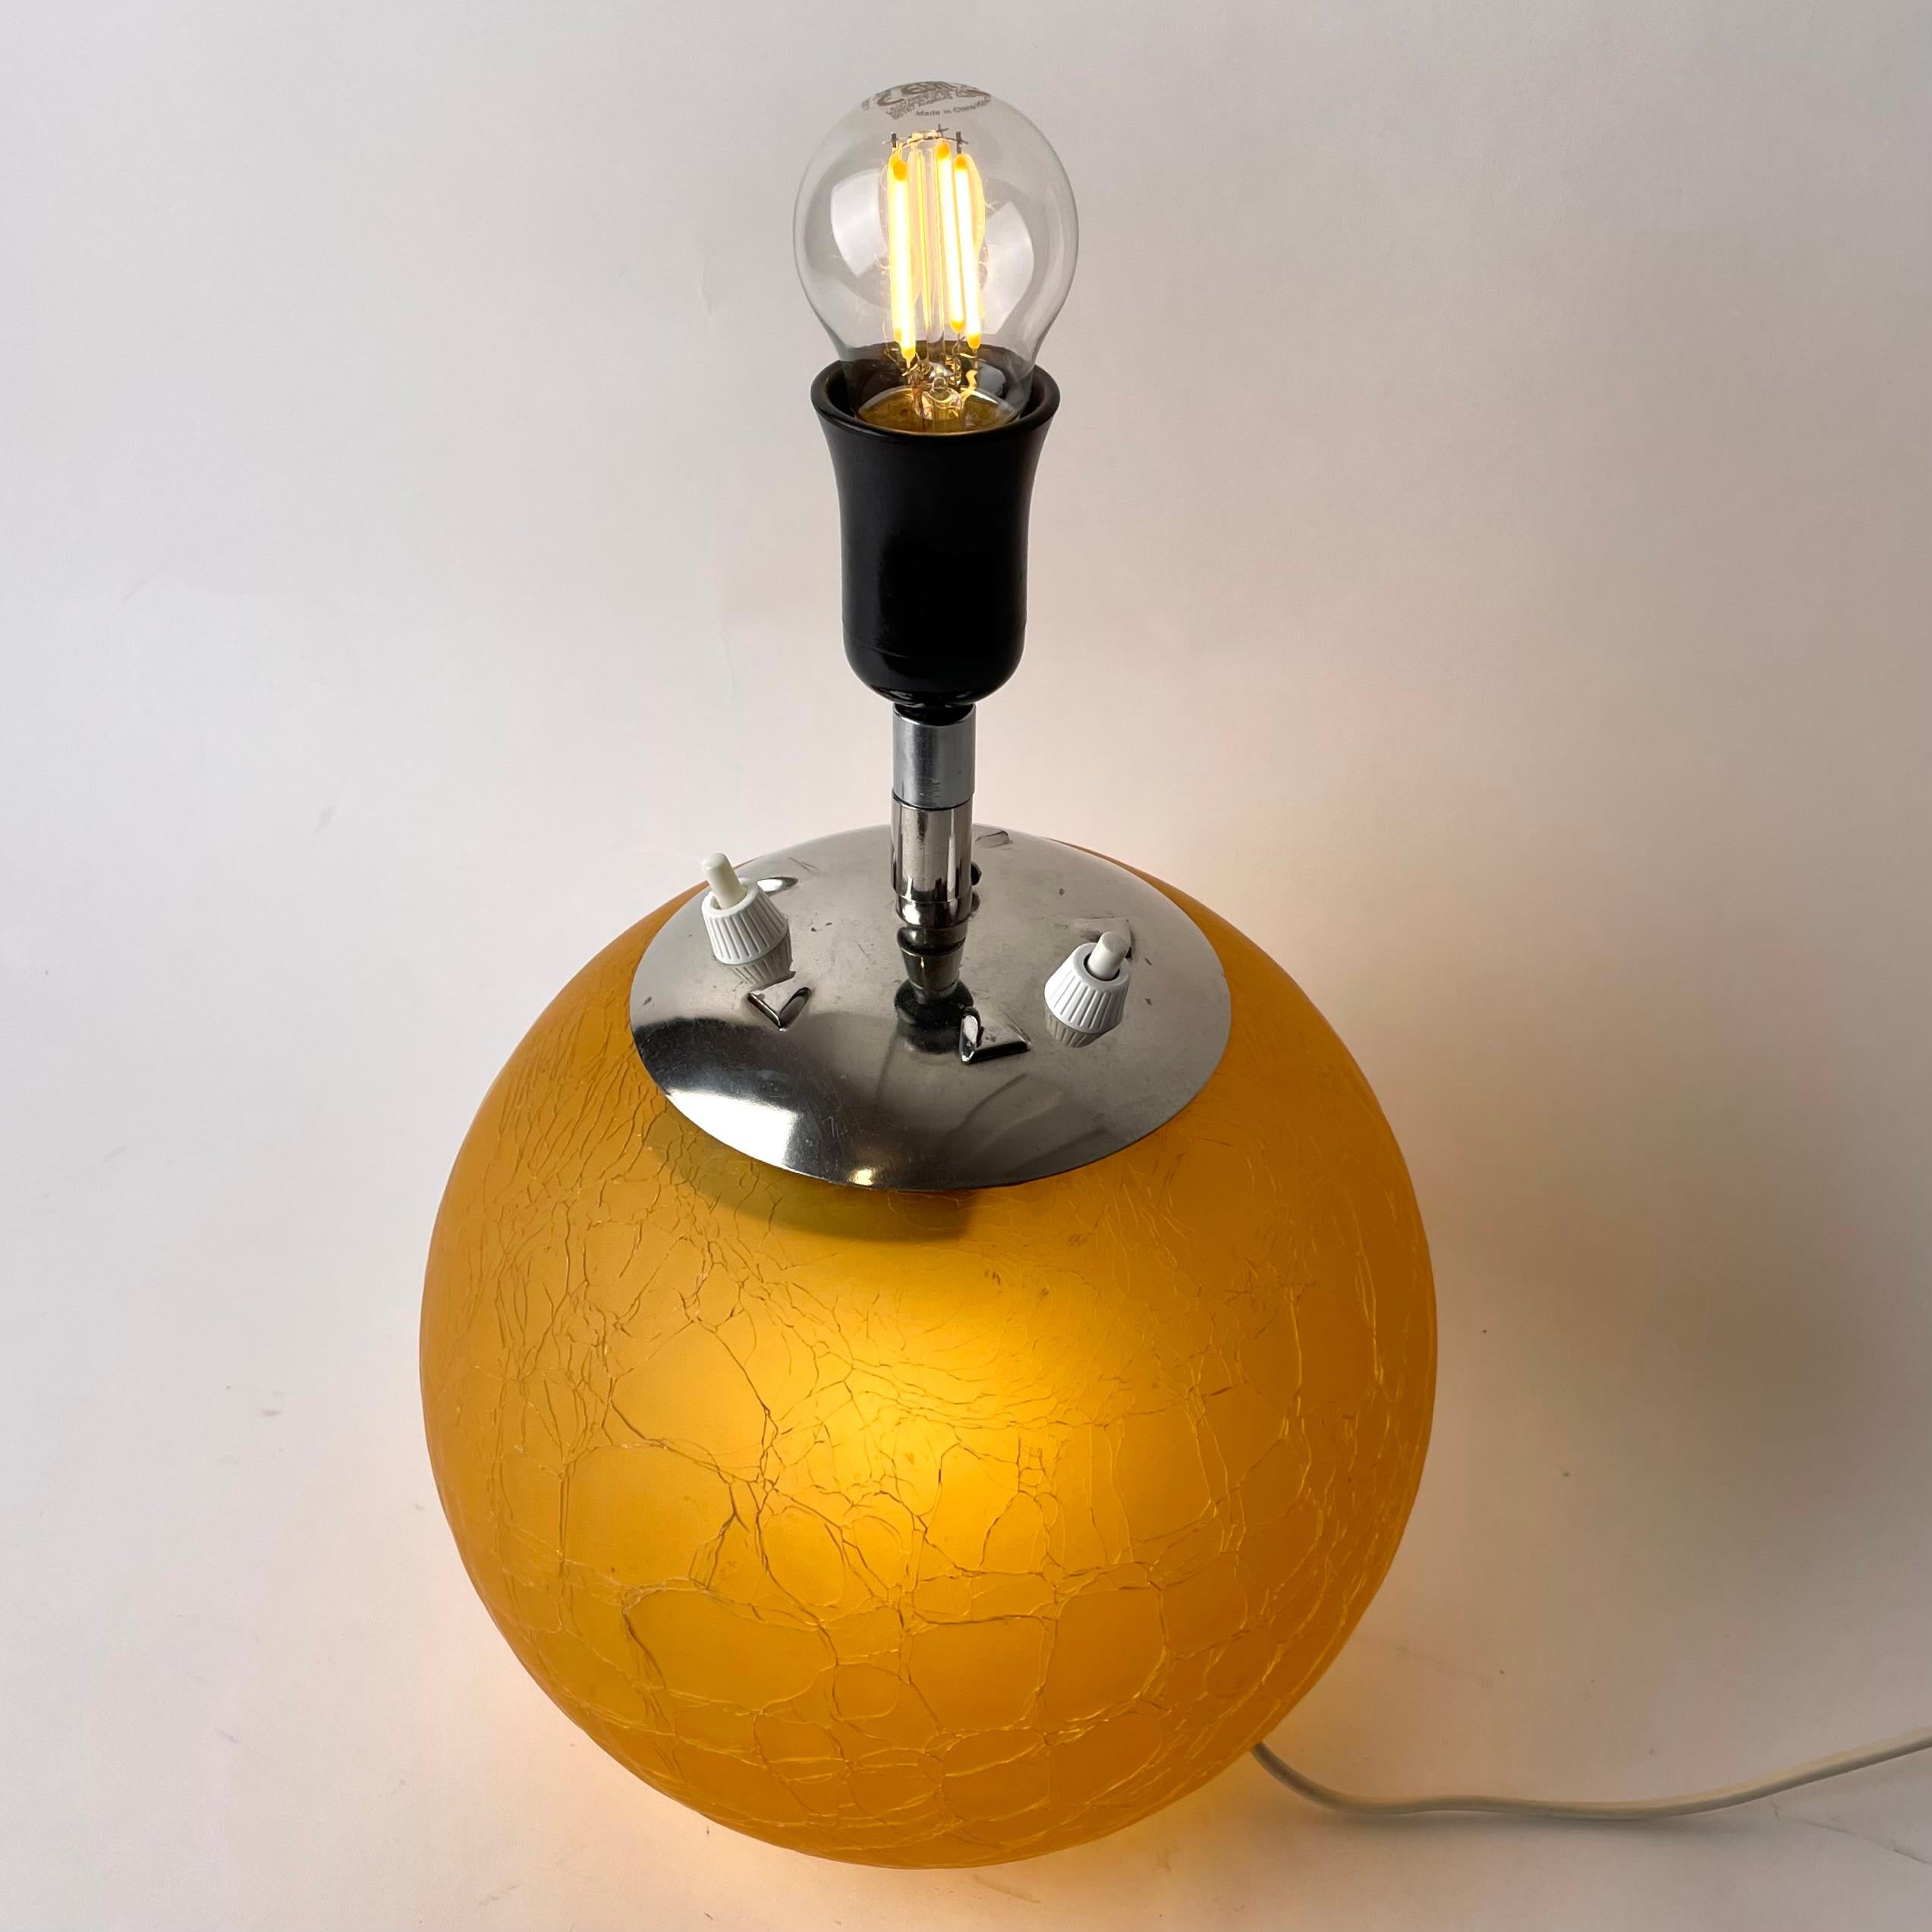 Glass Table Lamp with elegant double lighting, one lamp in the visible lampholder and another lamp inside the glass ball. Period Art Deco made during the 1930s in a cracked glass so-called ”Skansen Glass” (Swedish) and with a top in chrome.

Wear